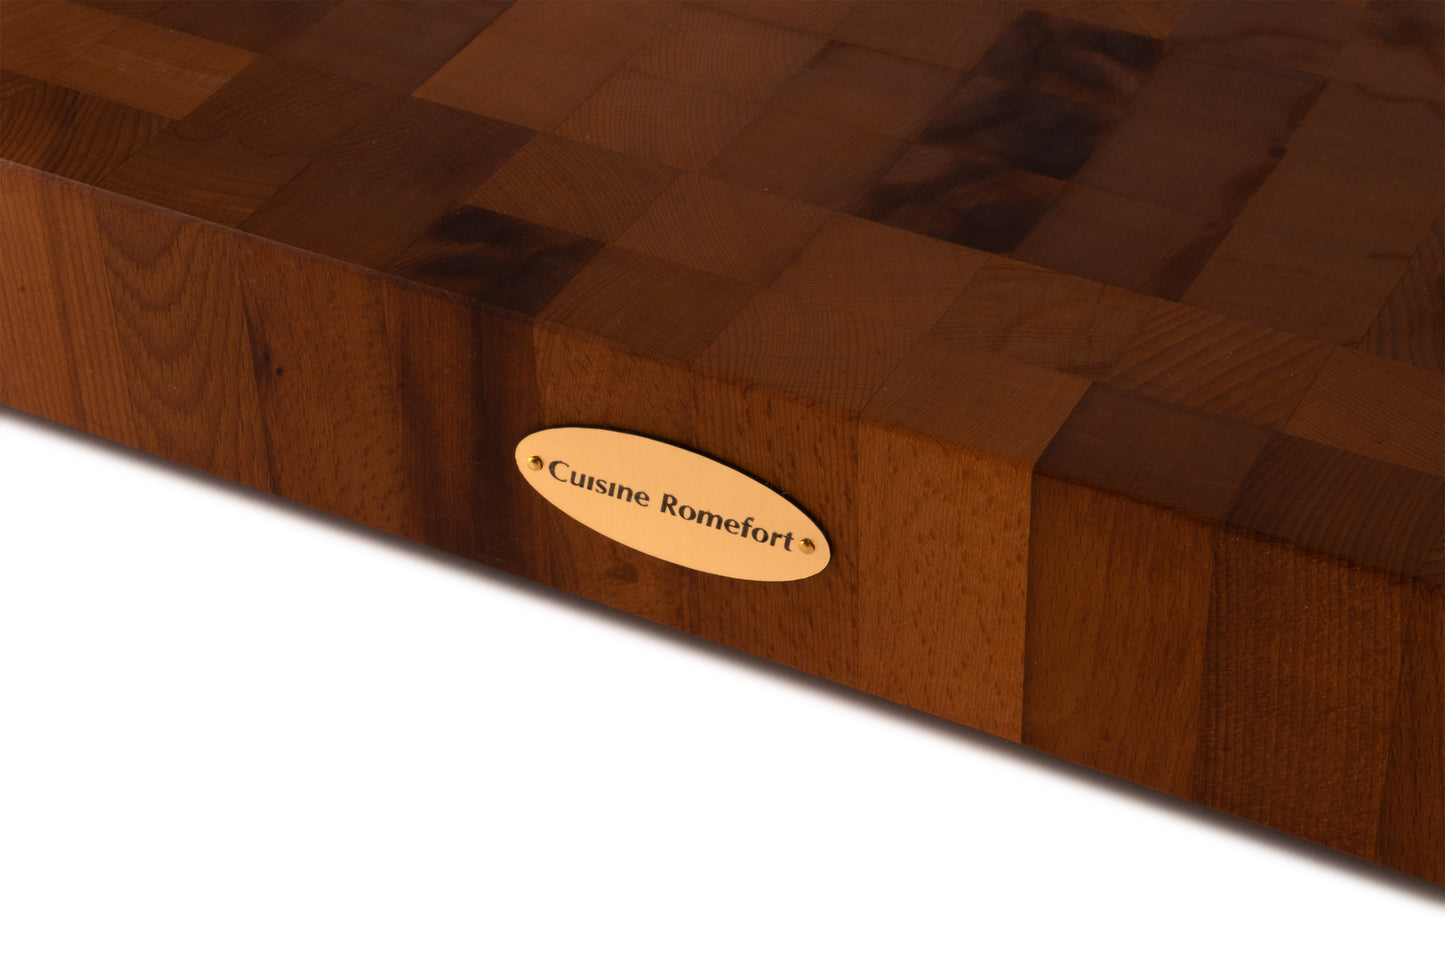 Butcher block with emblem (23.6 x 15.7 x 2.75 inches) made out of thermo treated, end grain beech wood